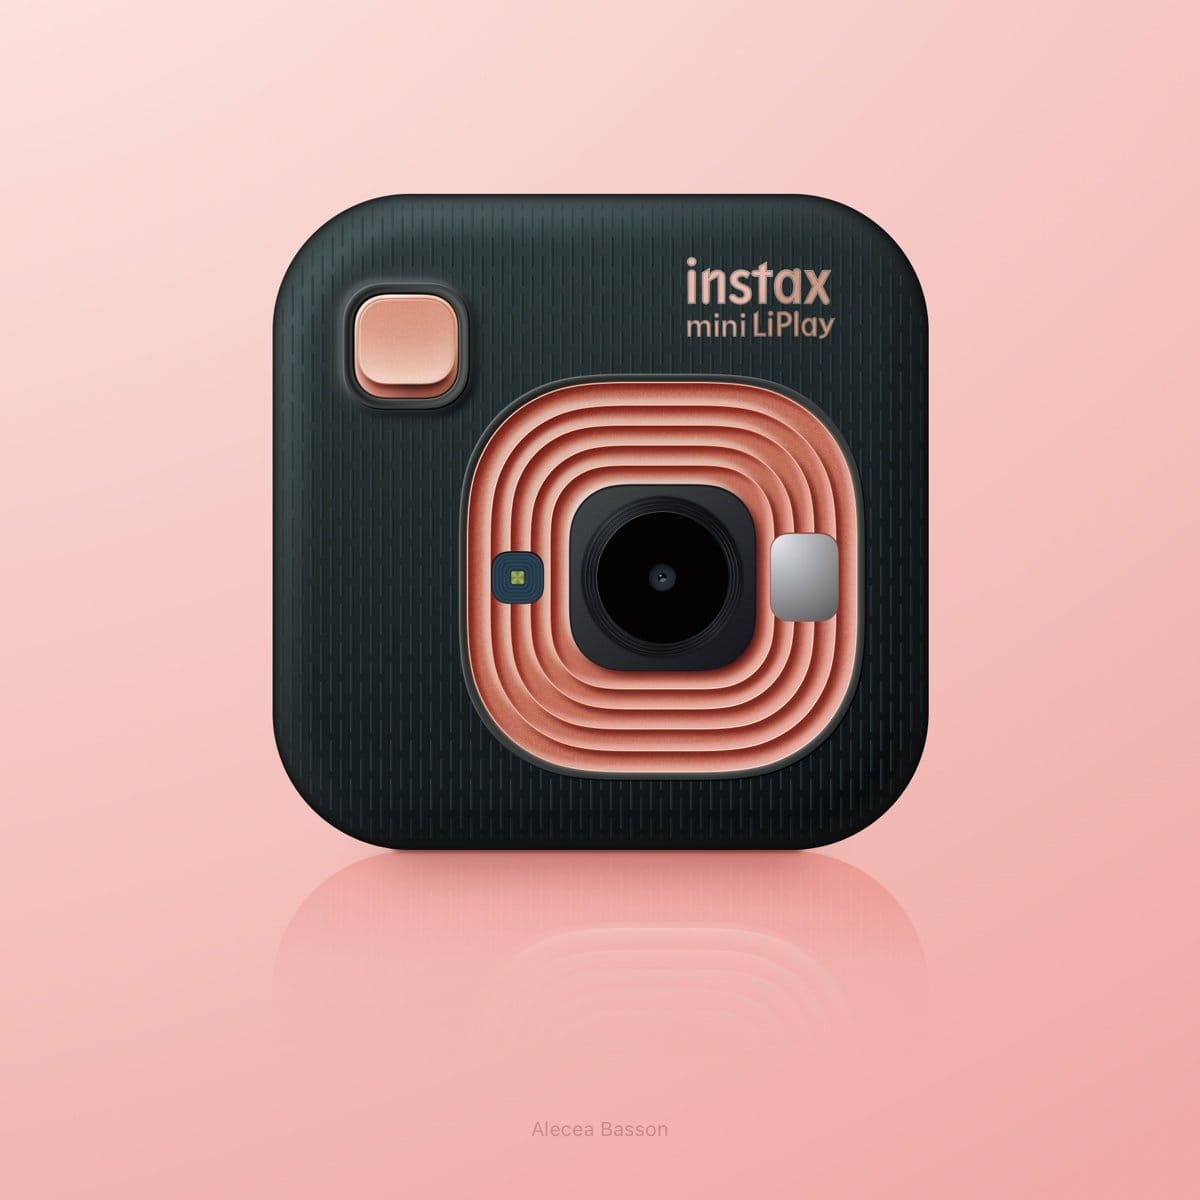 Instax camera reproduced in the form of an icon.